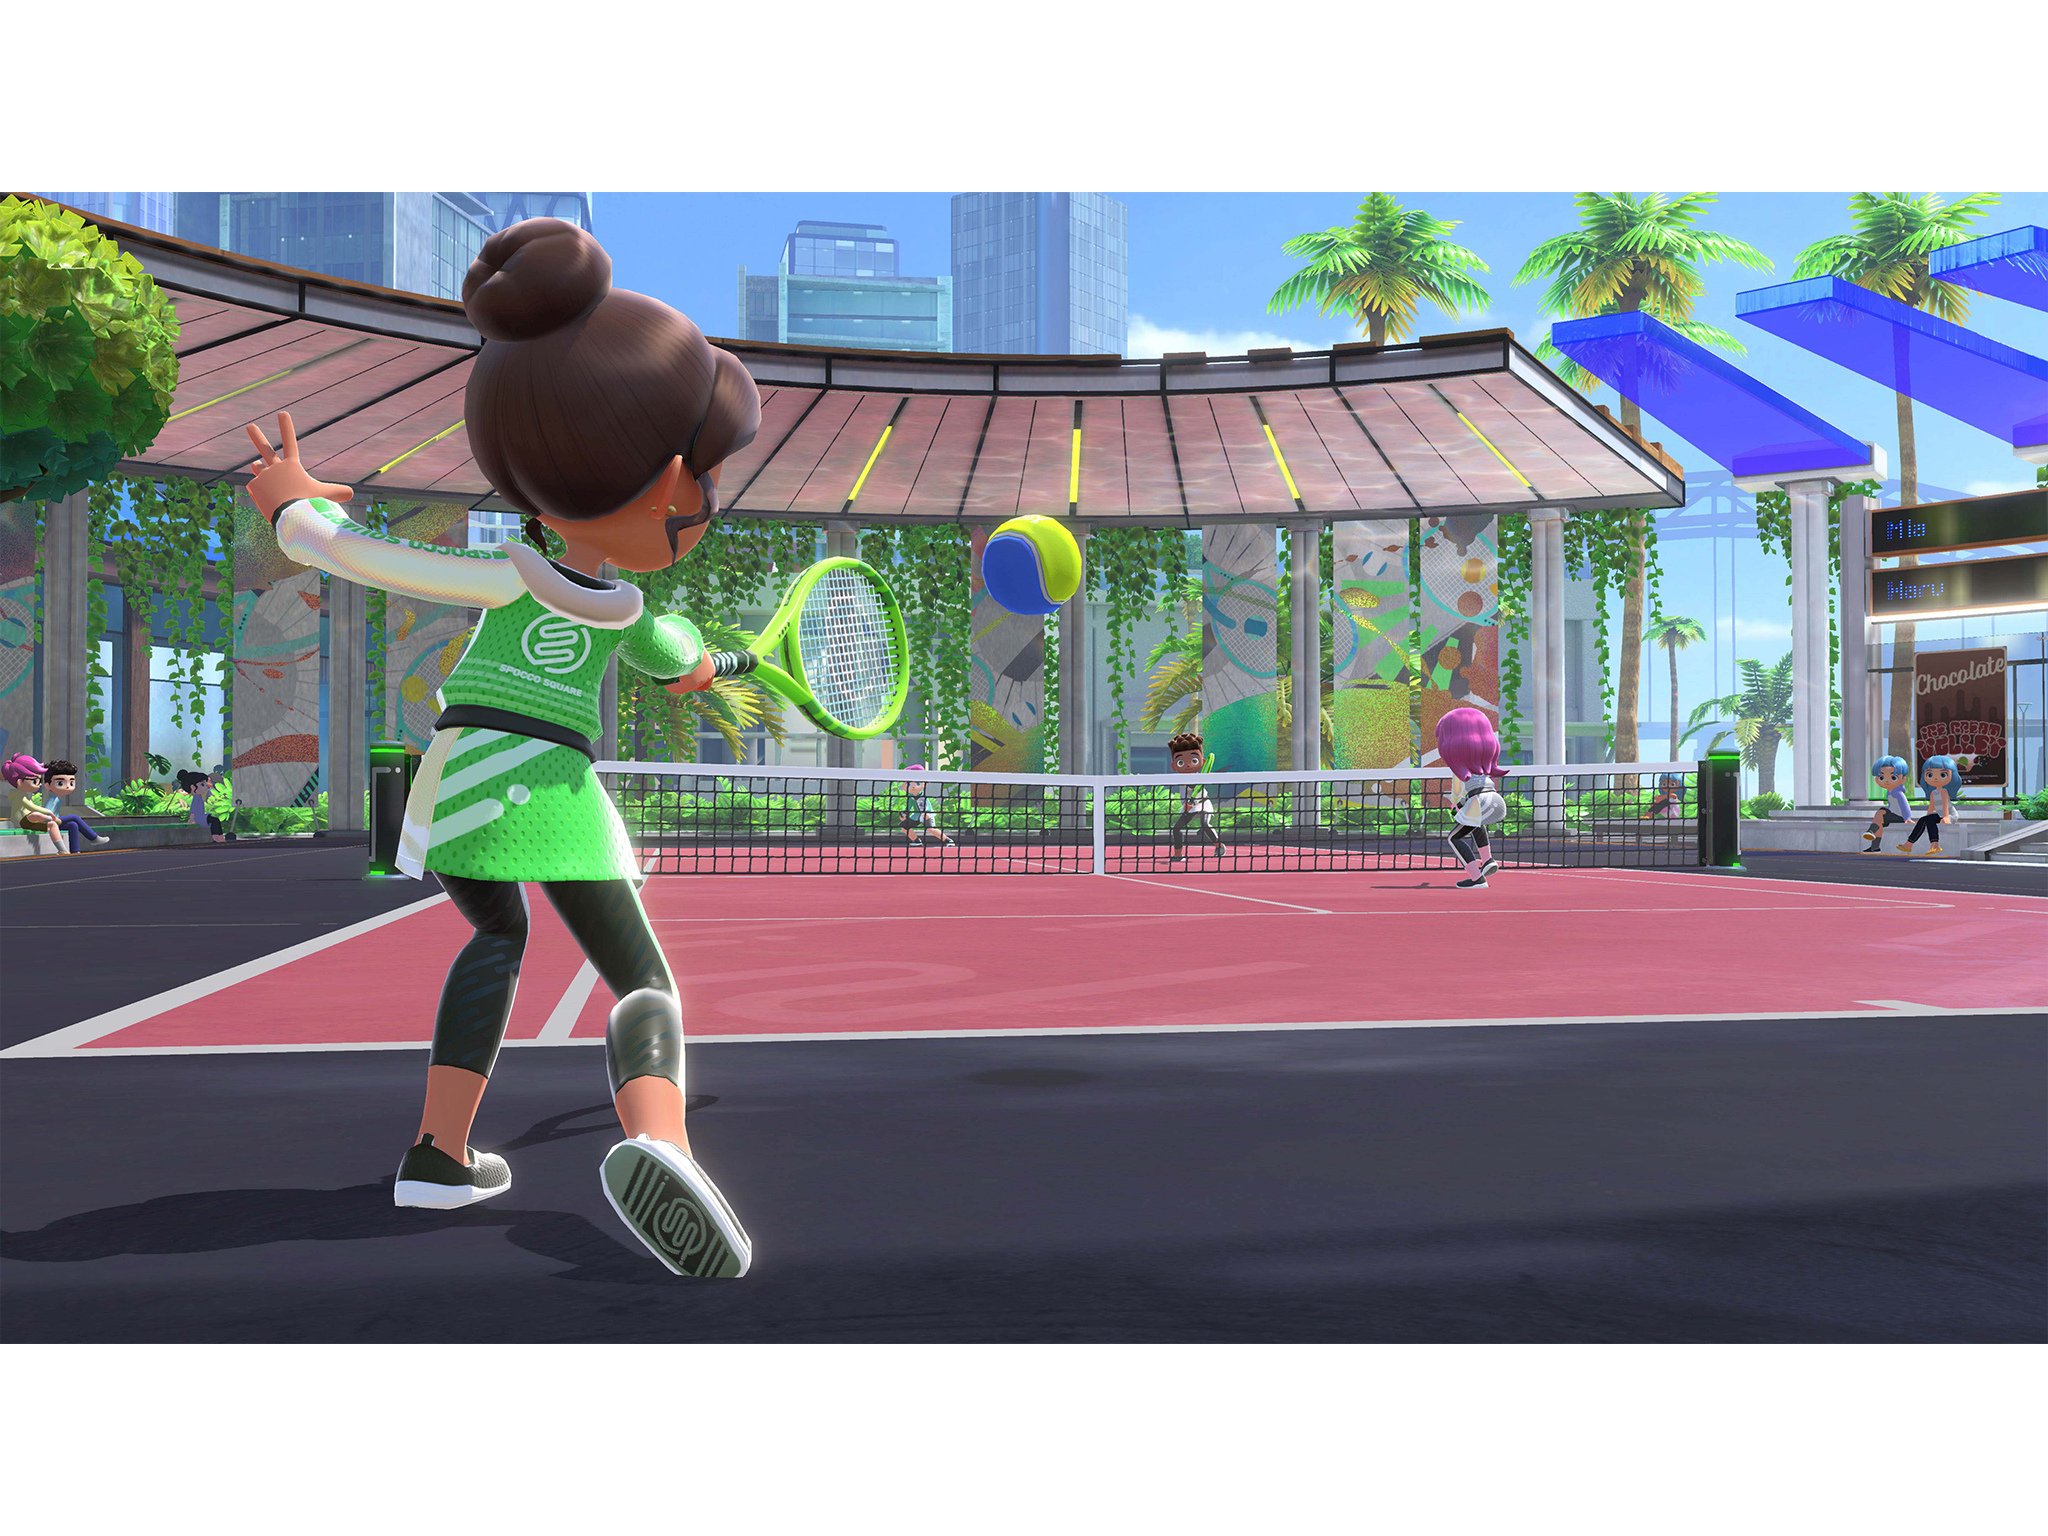 Tennis requires more precision than it did on the Wii